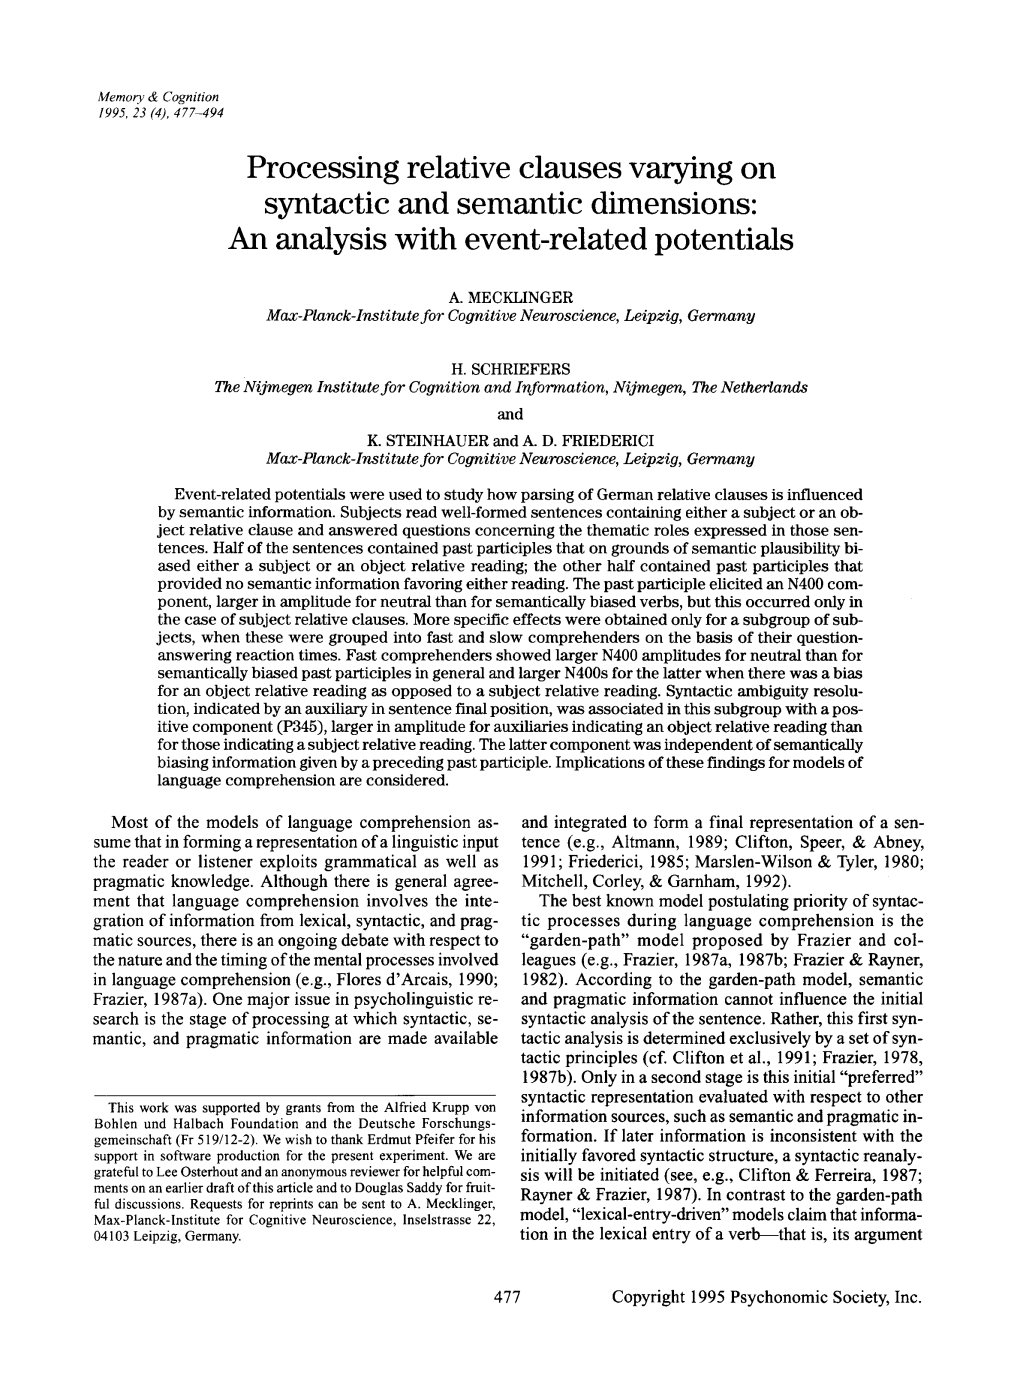 Processing Relative Clauses Varying on Syntactic and Semantic Dimensions: an Analysis with Event-Related Potentials